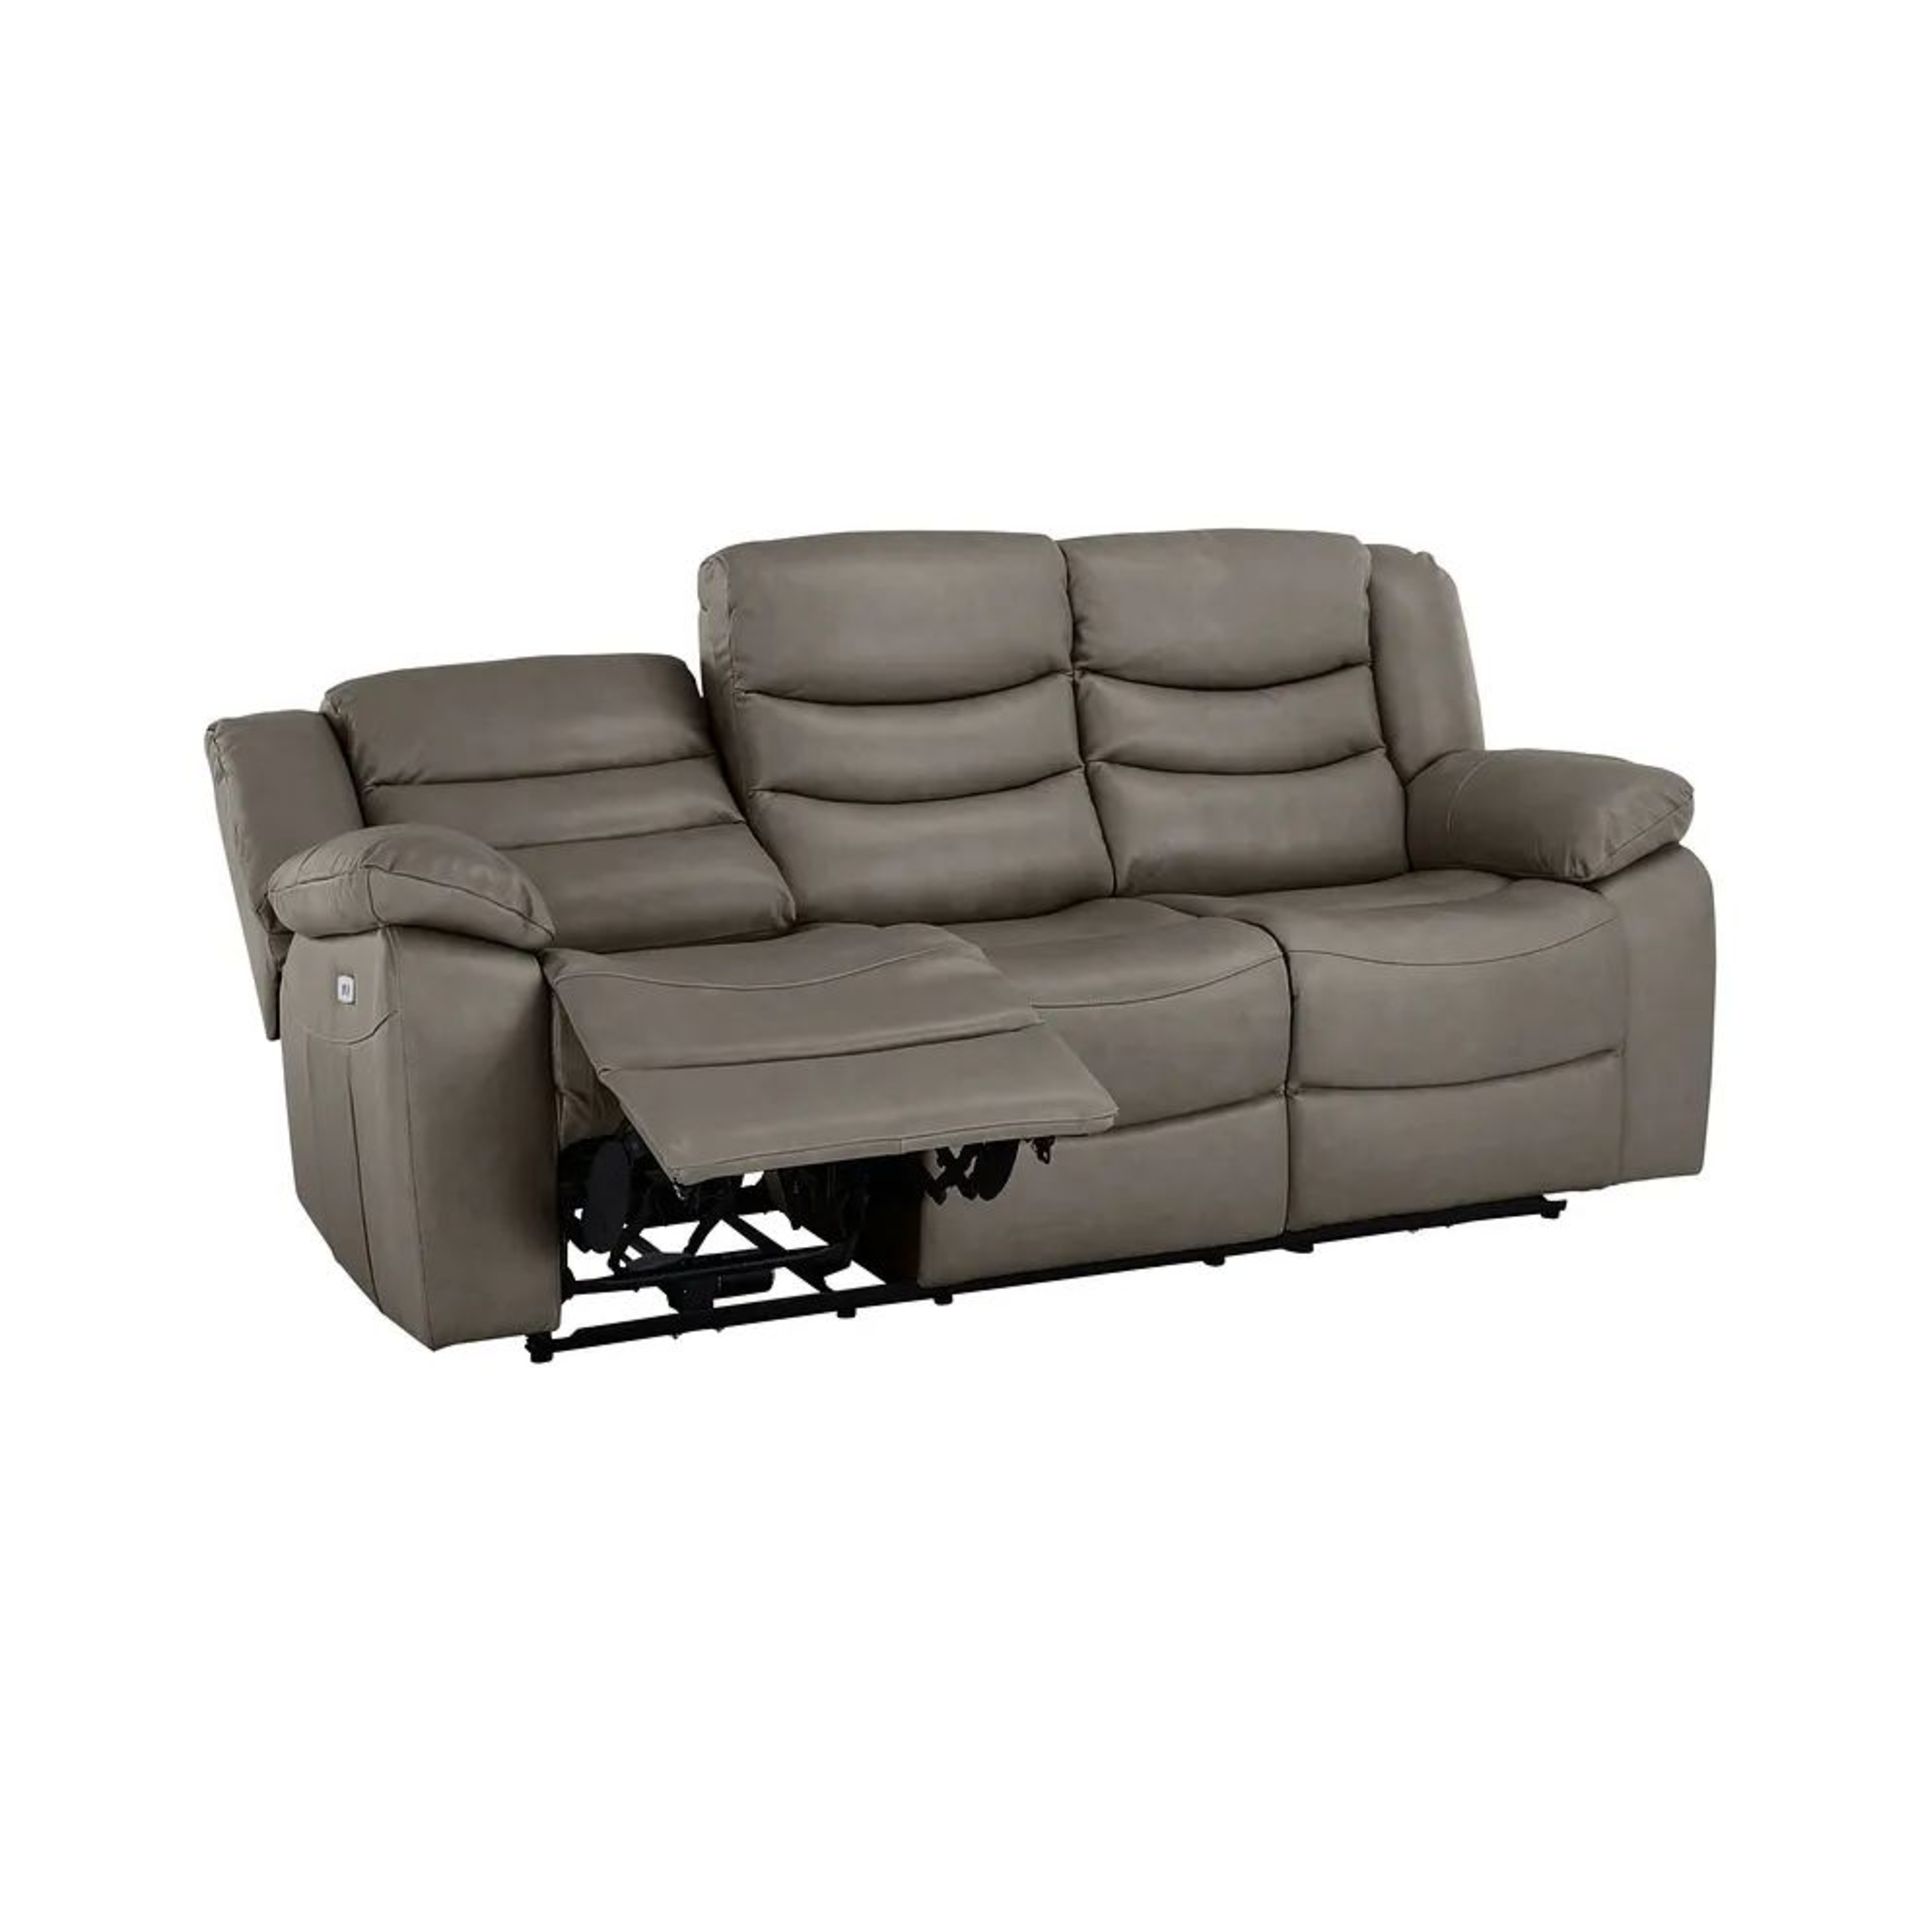 BRAND NEW MARLOW 3 Seater Electric Recliner Sofa - DARK GREY LEATHER. RRP £1849. Our Marlow - Bild 4 aus 11